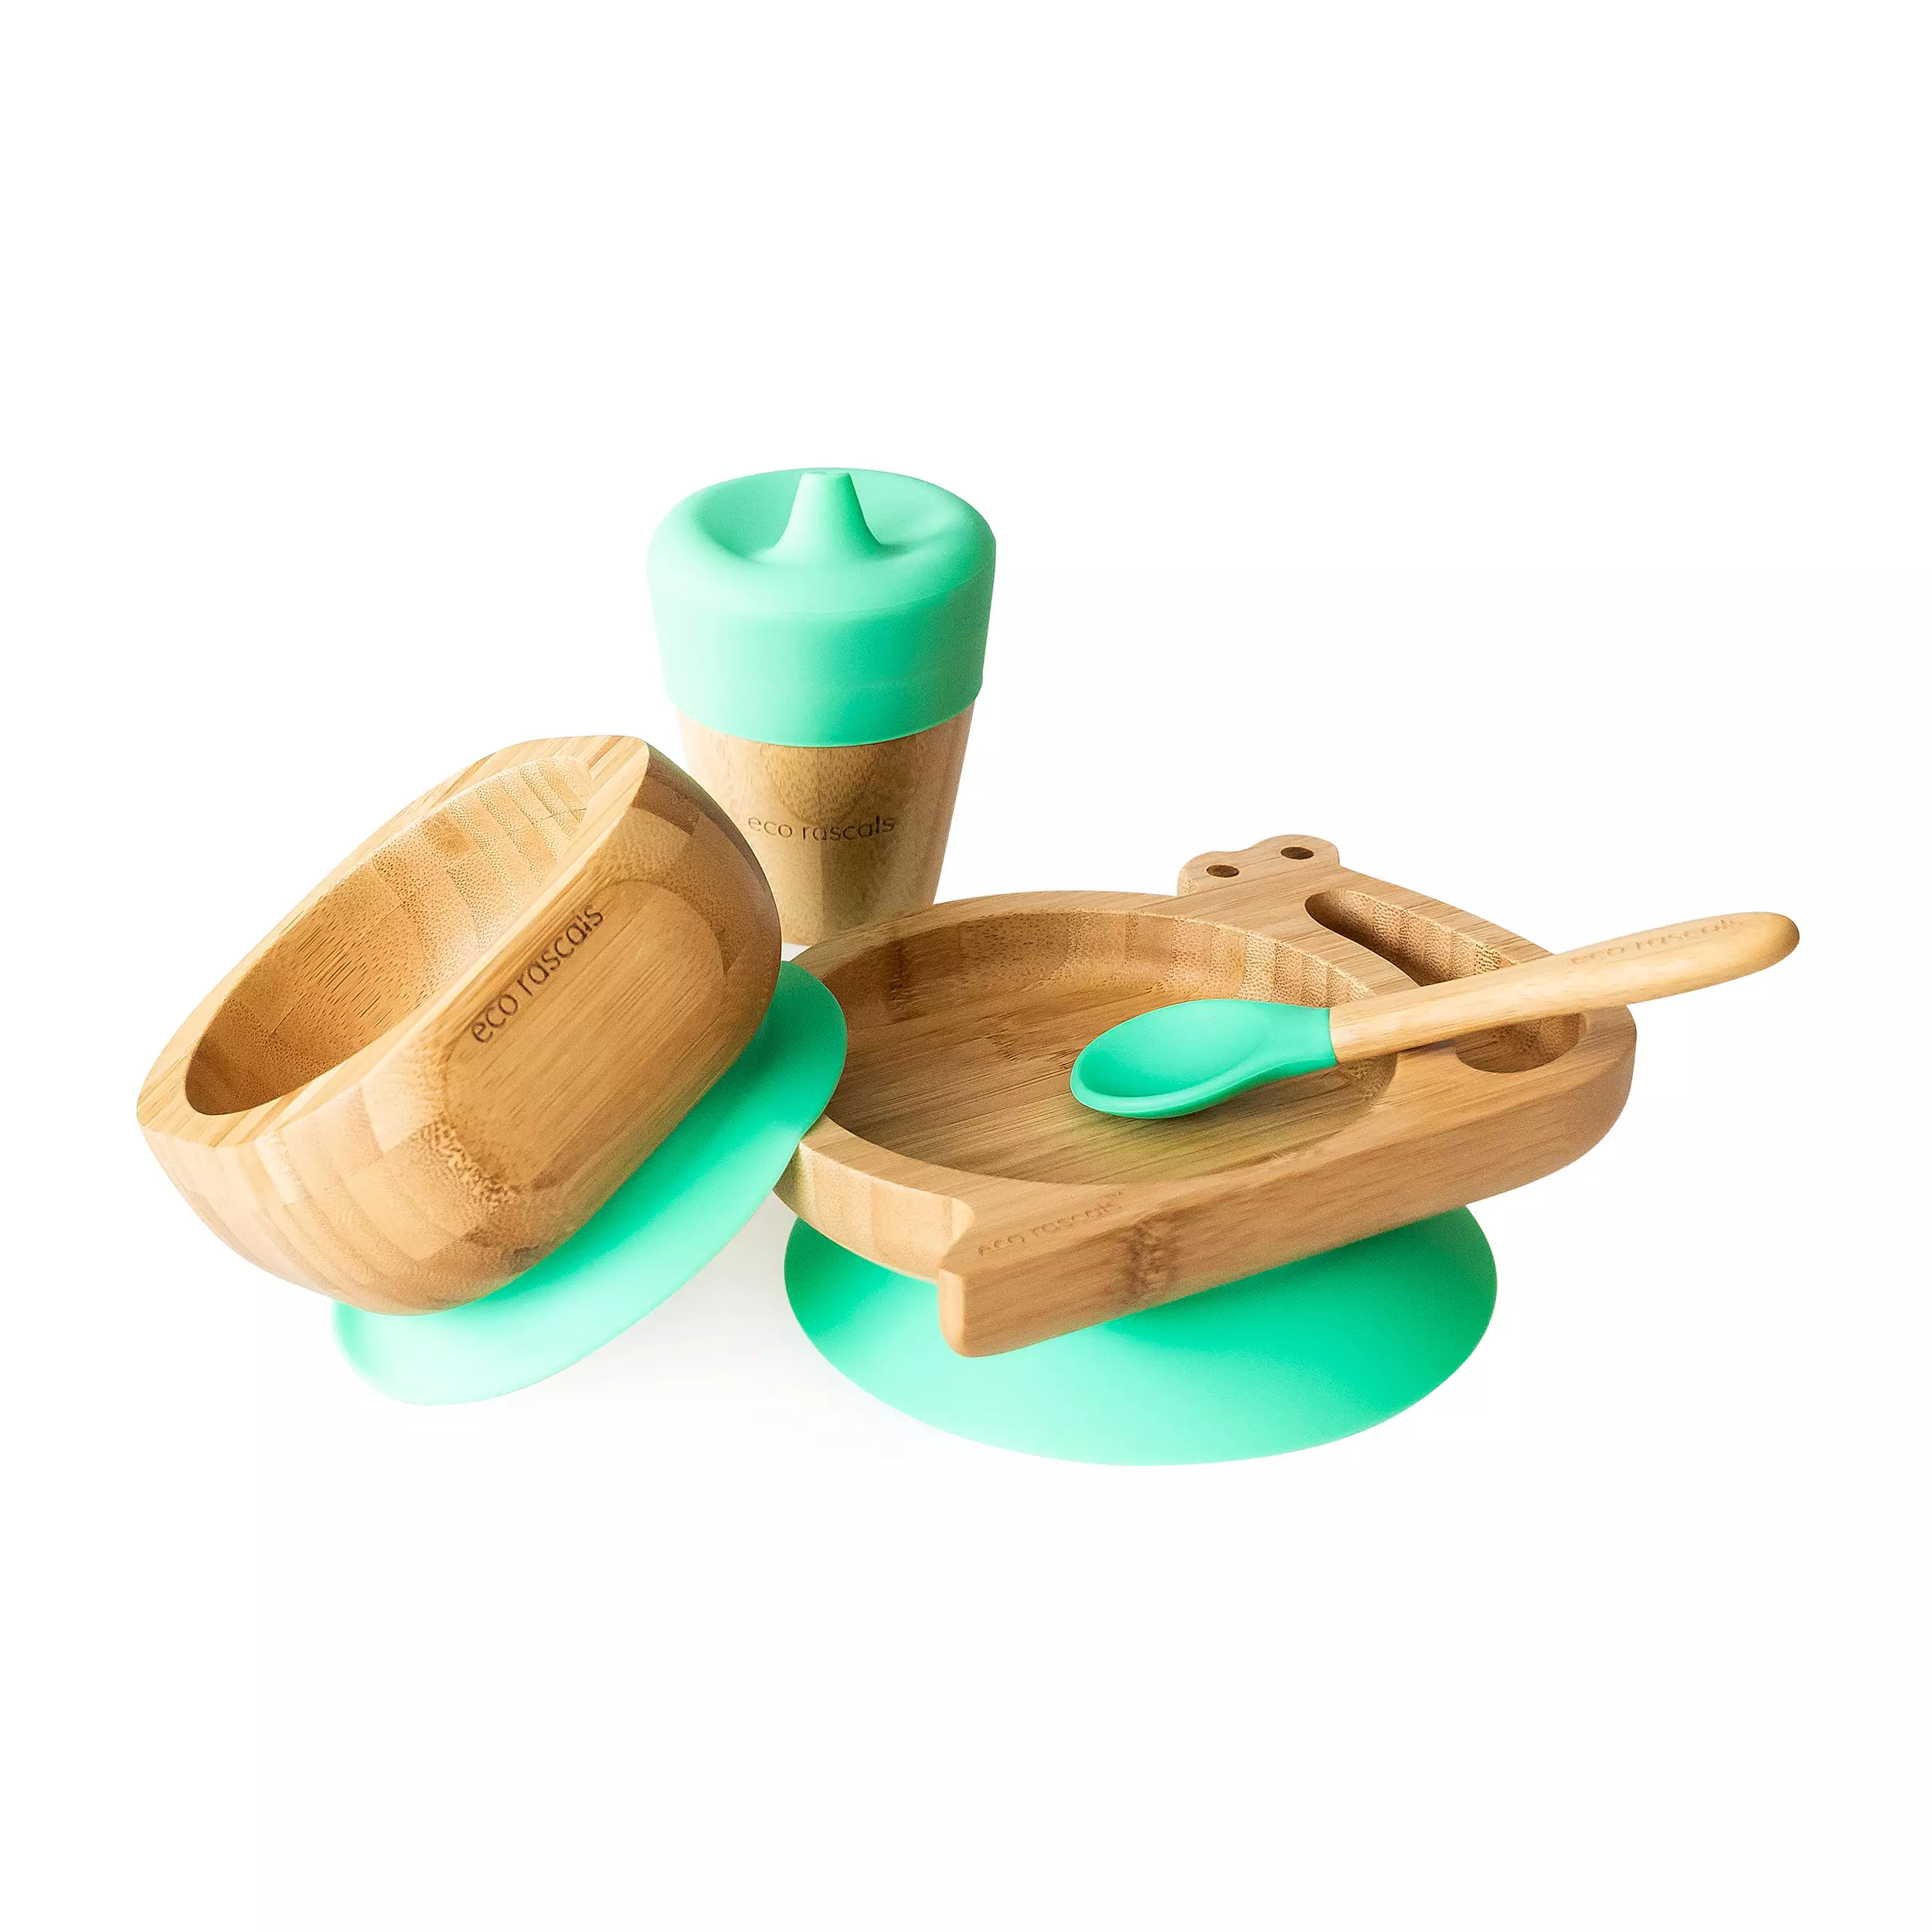 Bamboo Snail Plate - Weaning Gift Set - Green